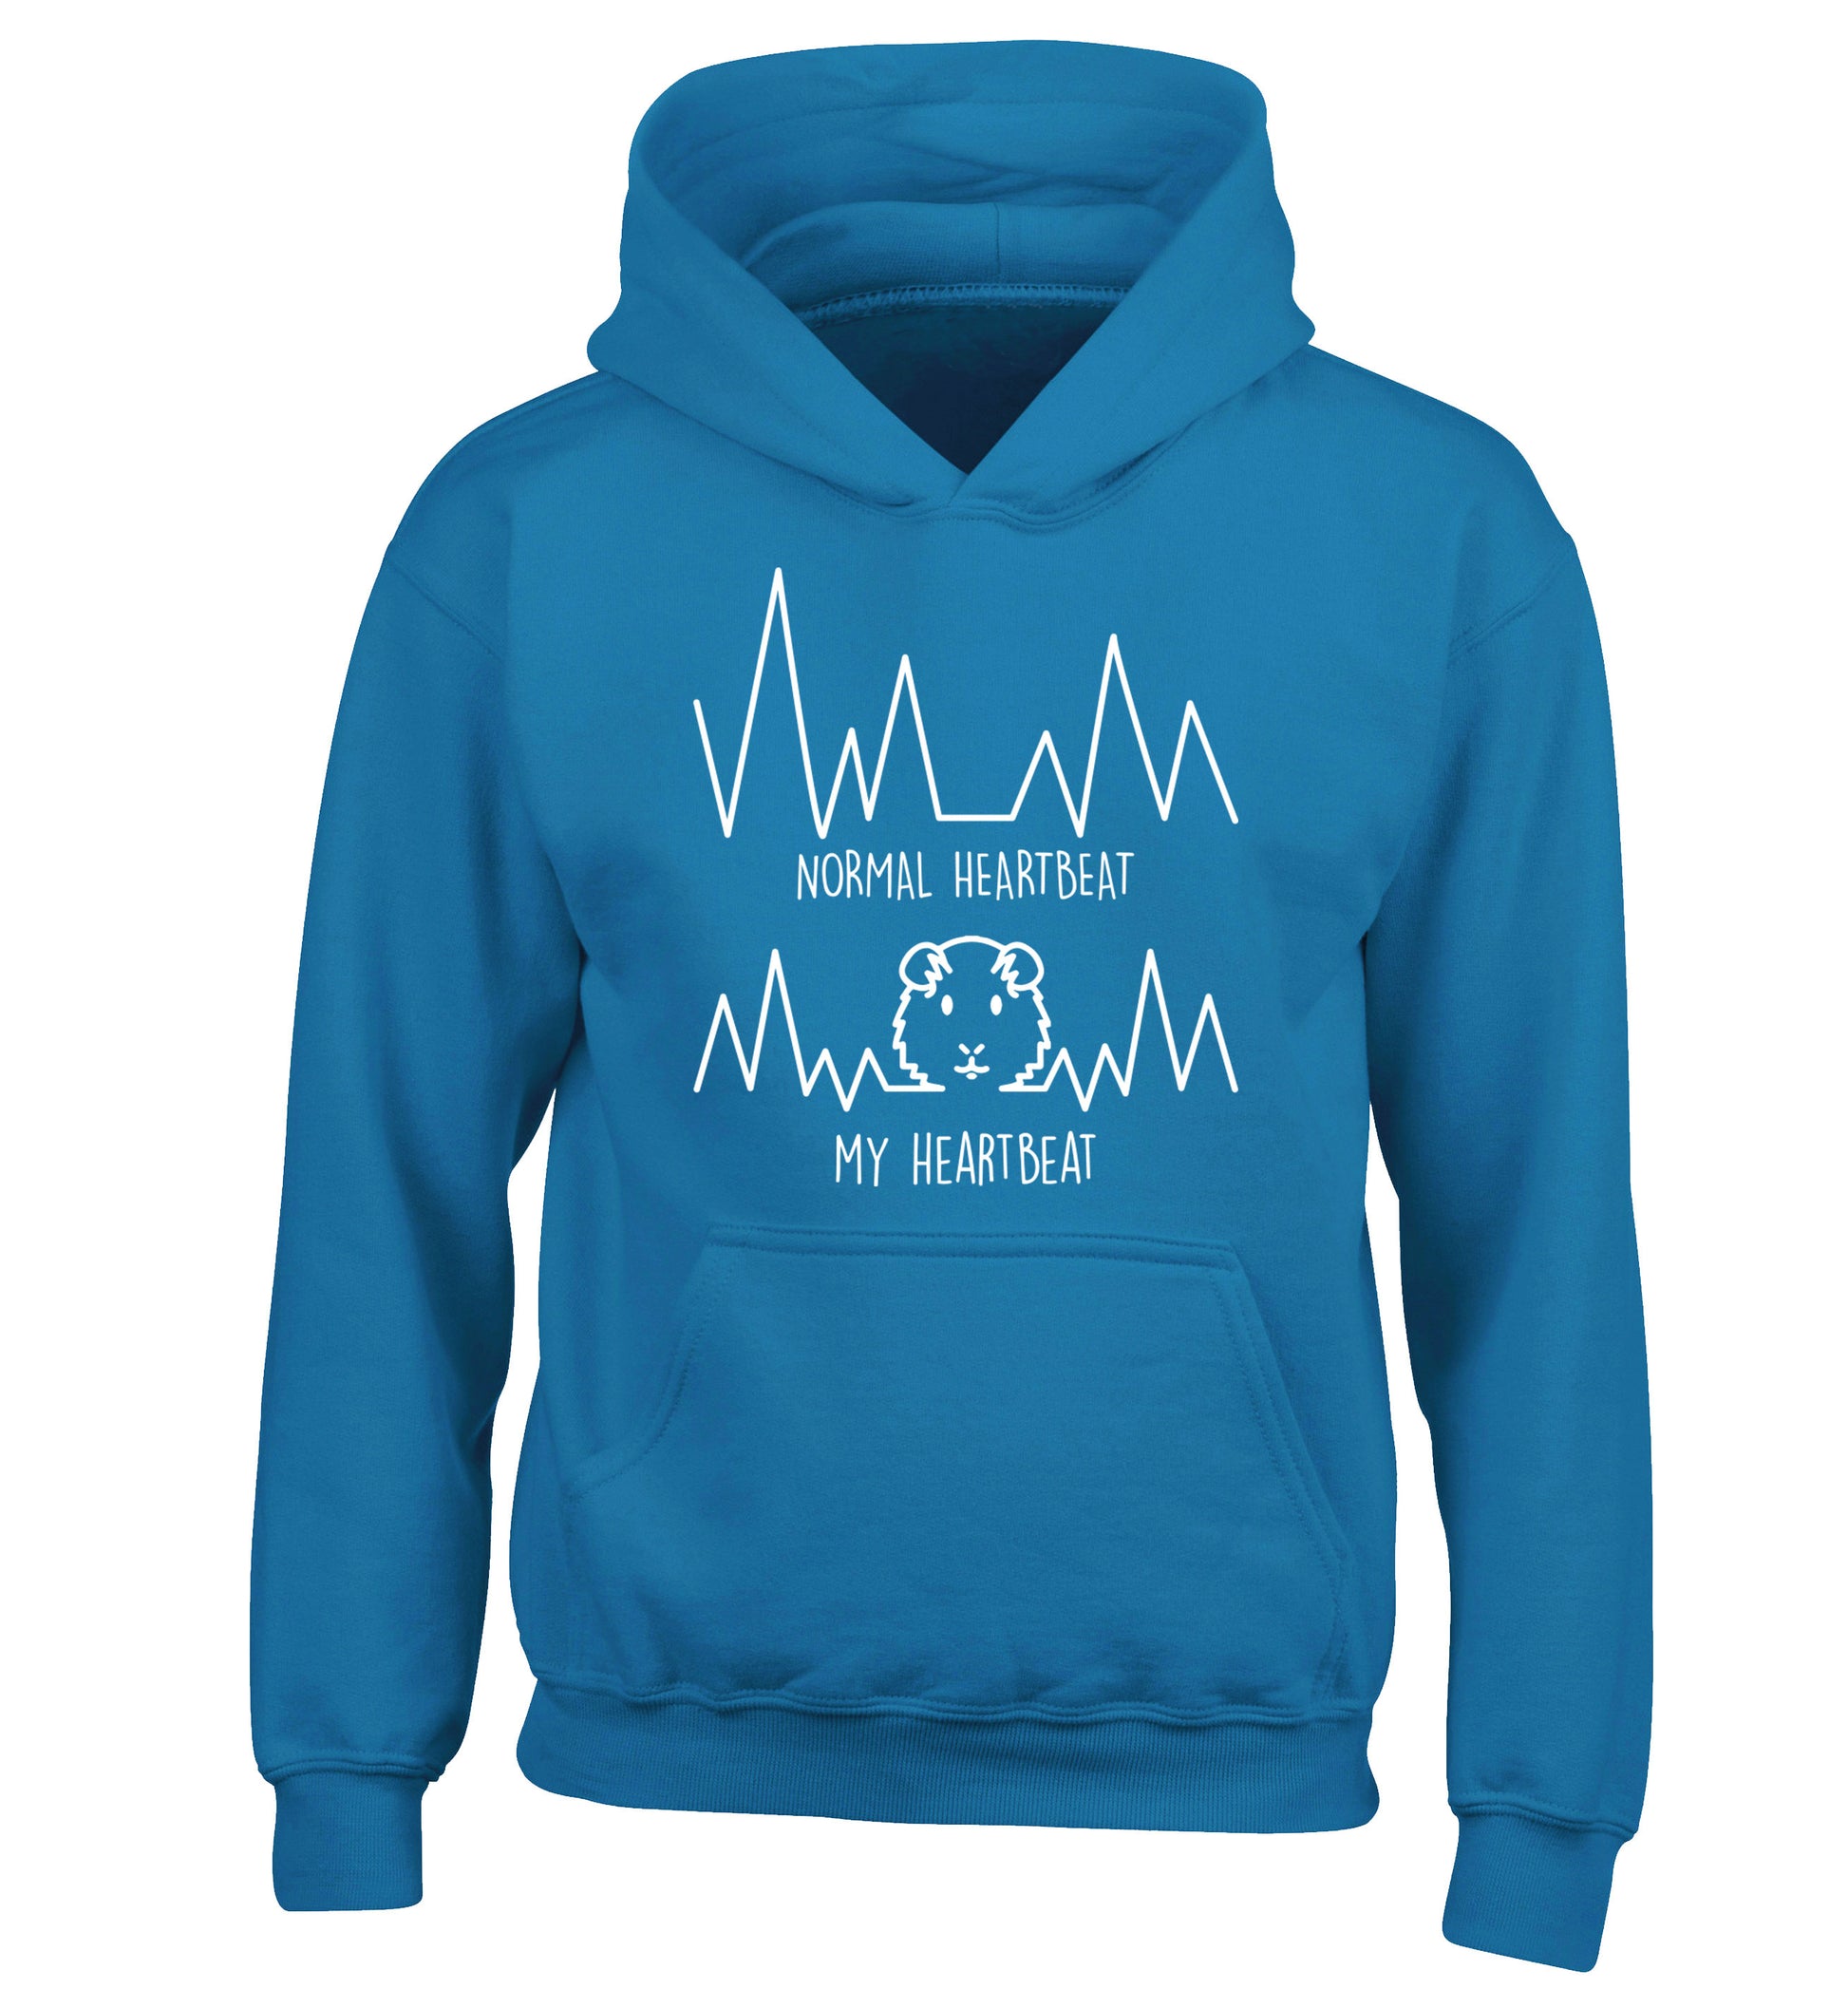 Normal heartbeat vs my heartbeat guinea pig lover children's blue hoodie 12-14 Years